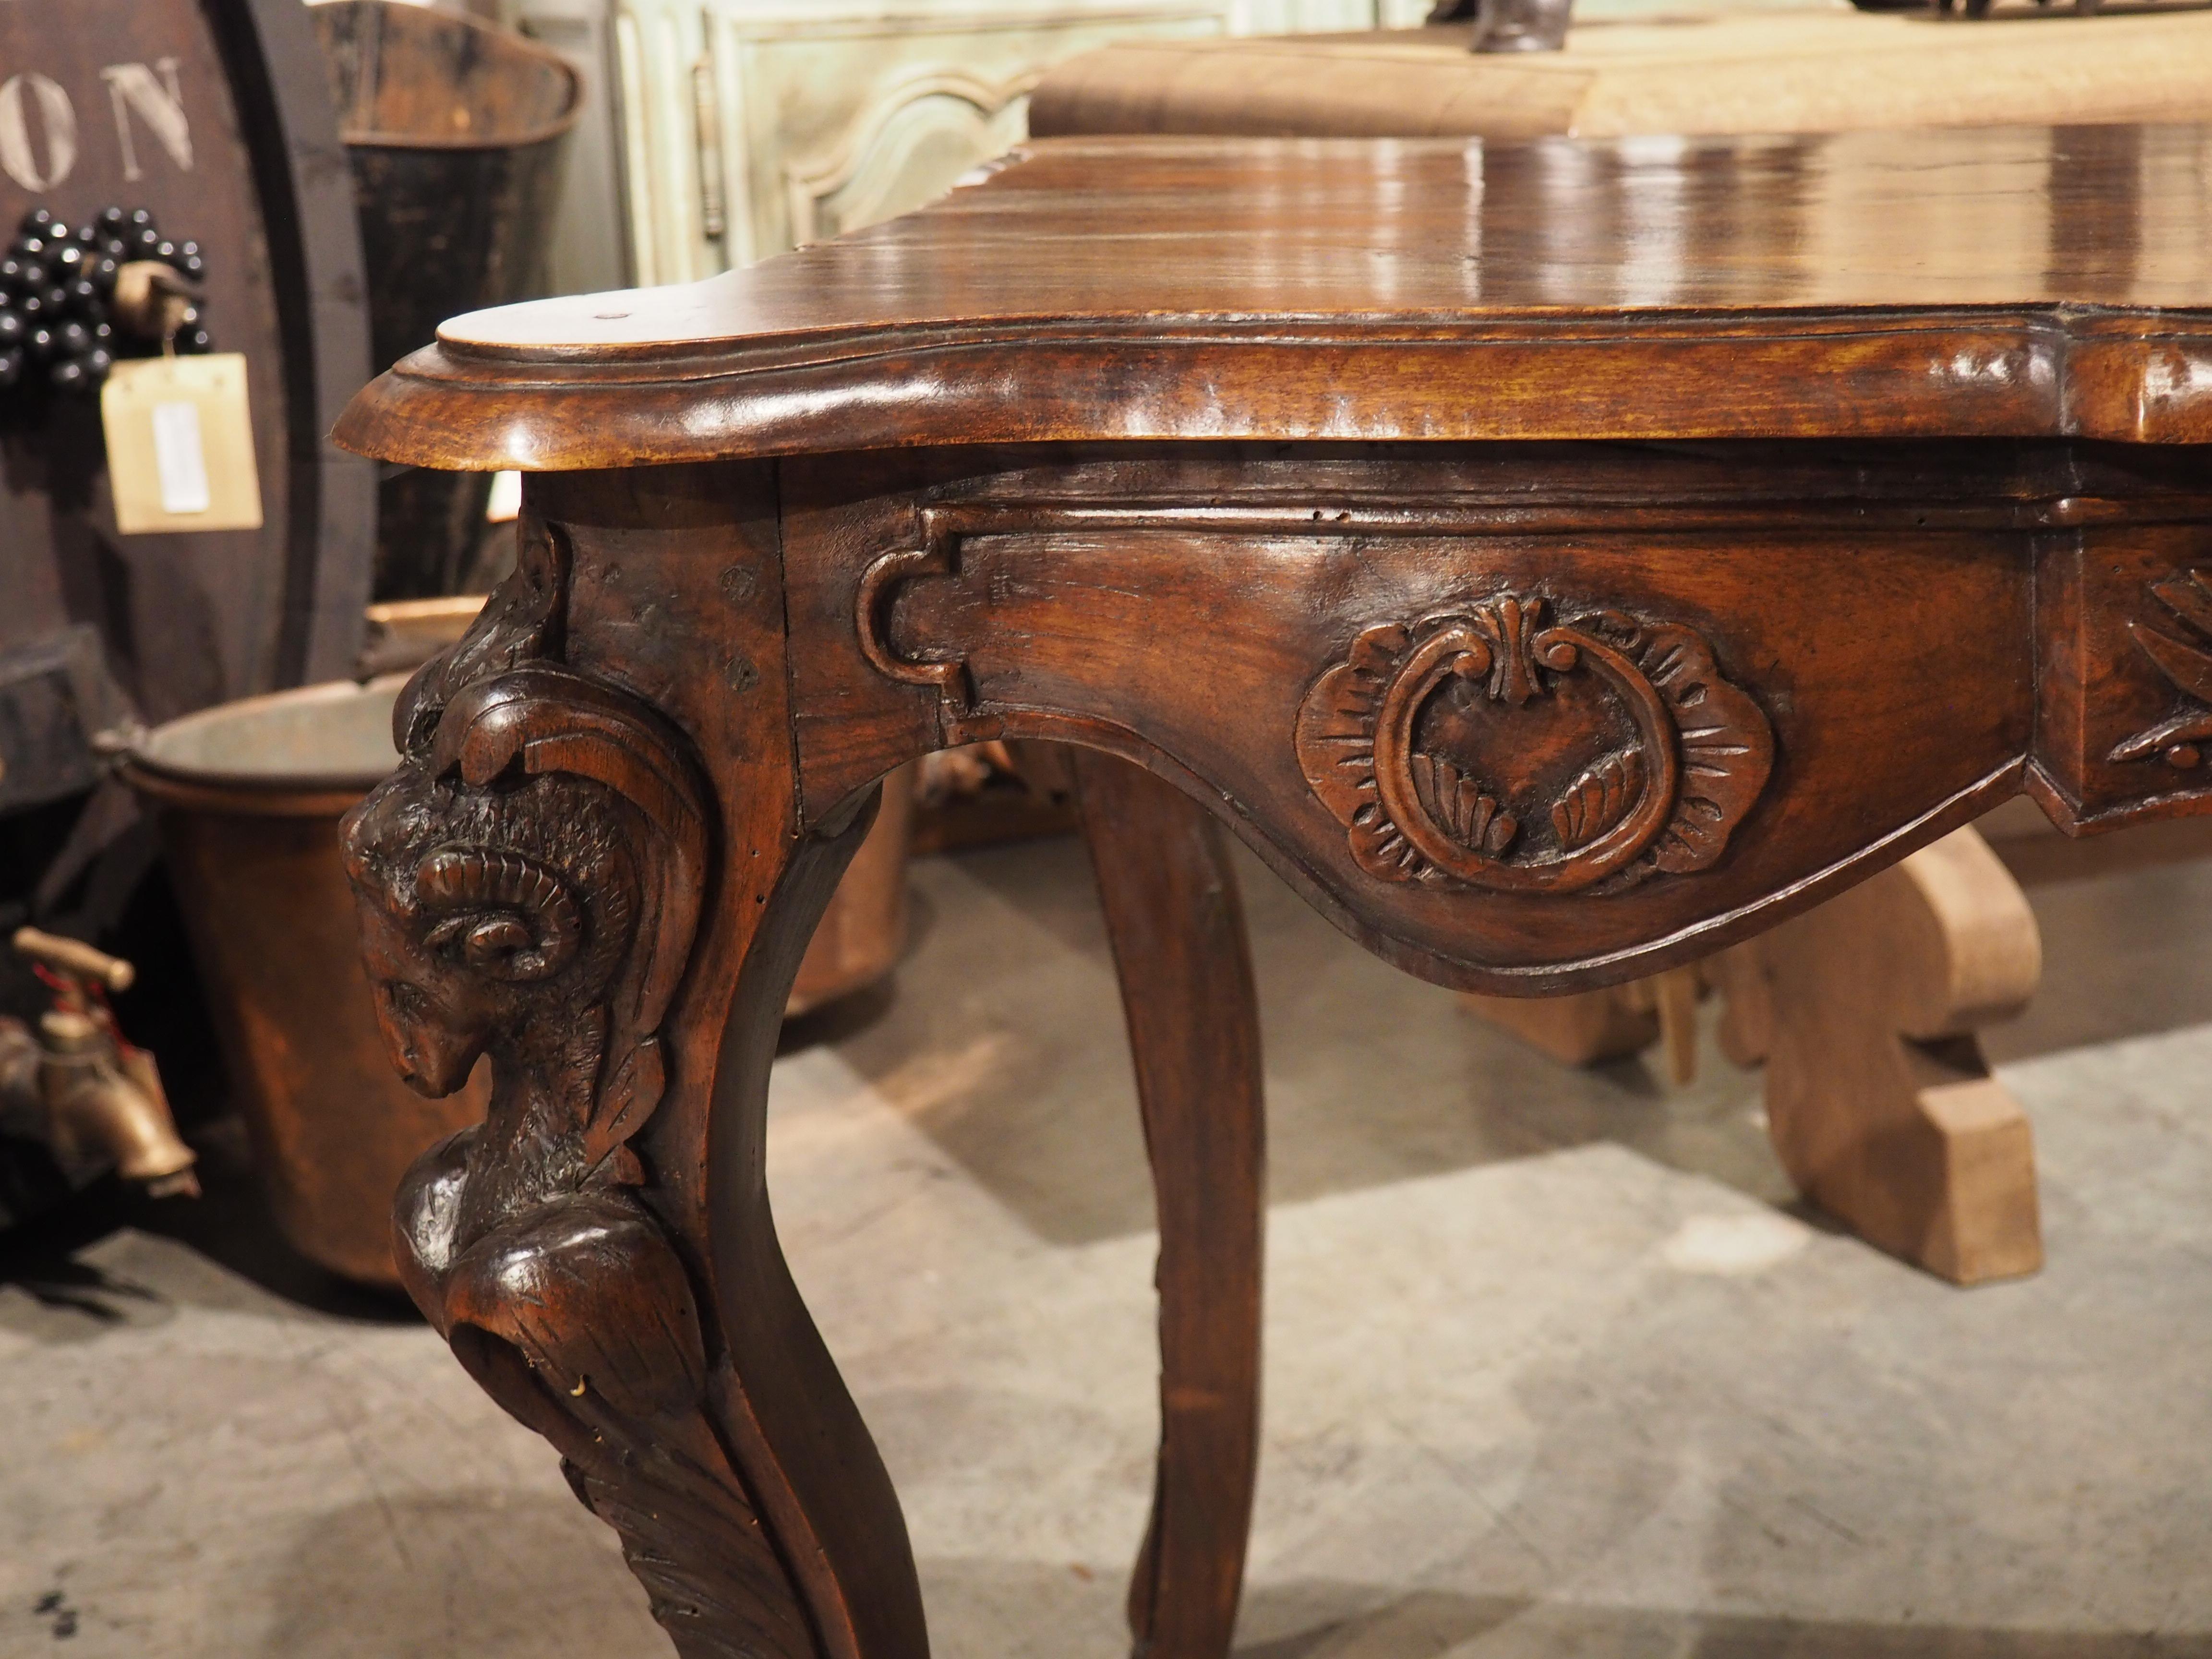 Circa 1870 French Walnut Wood Center Table with Rams' Heads and Fleur De Lys For Sale 4